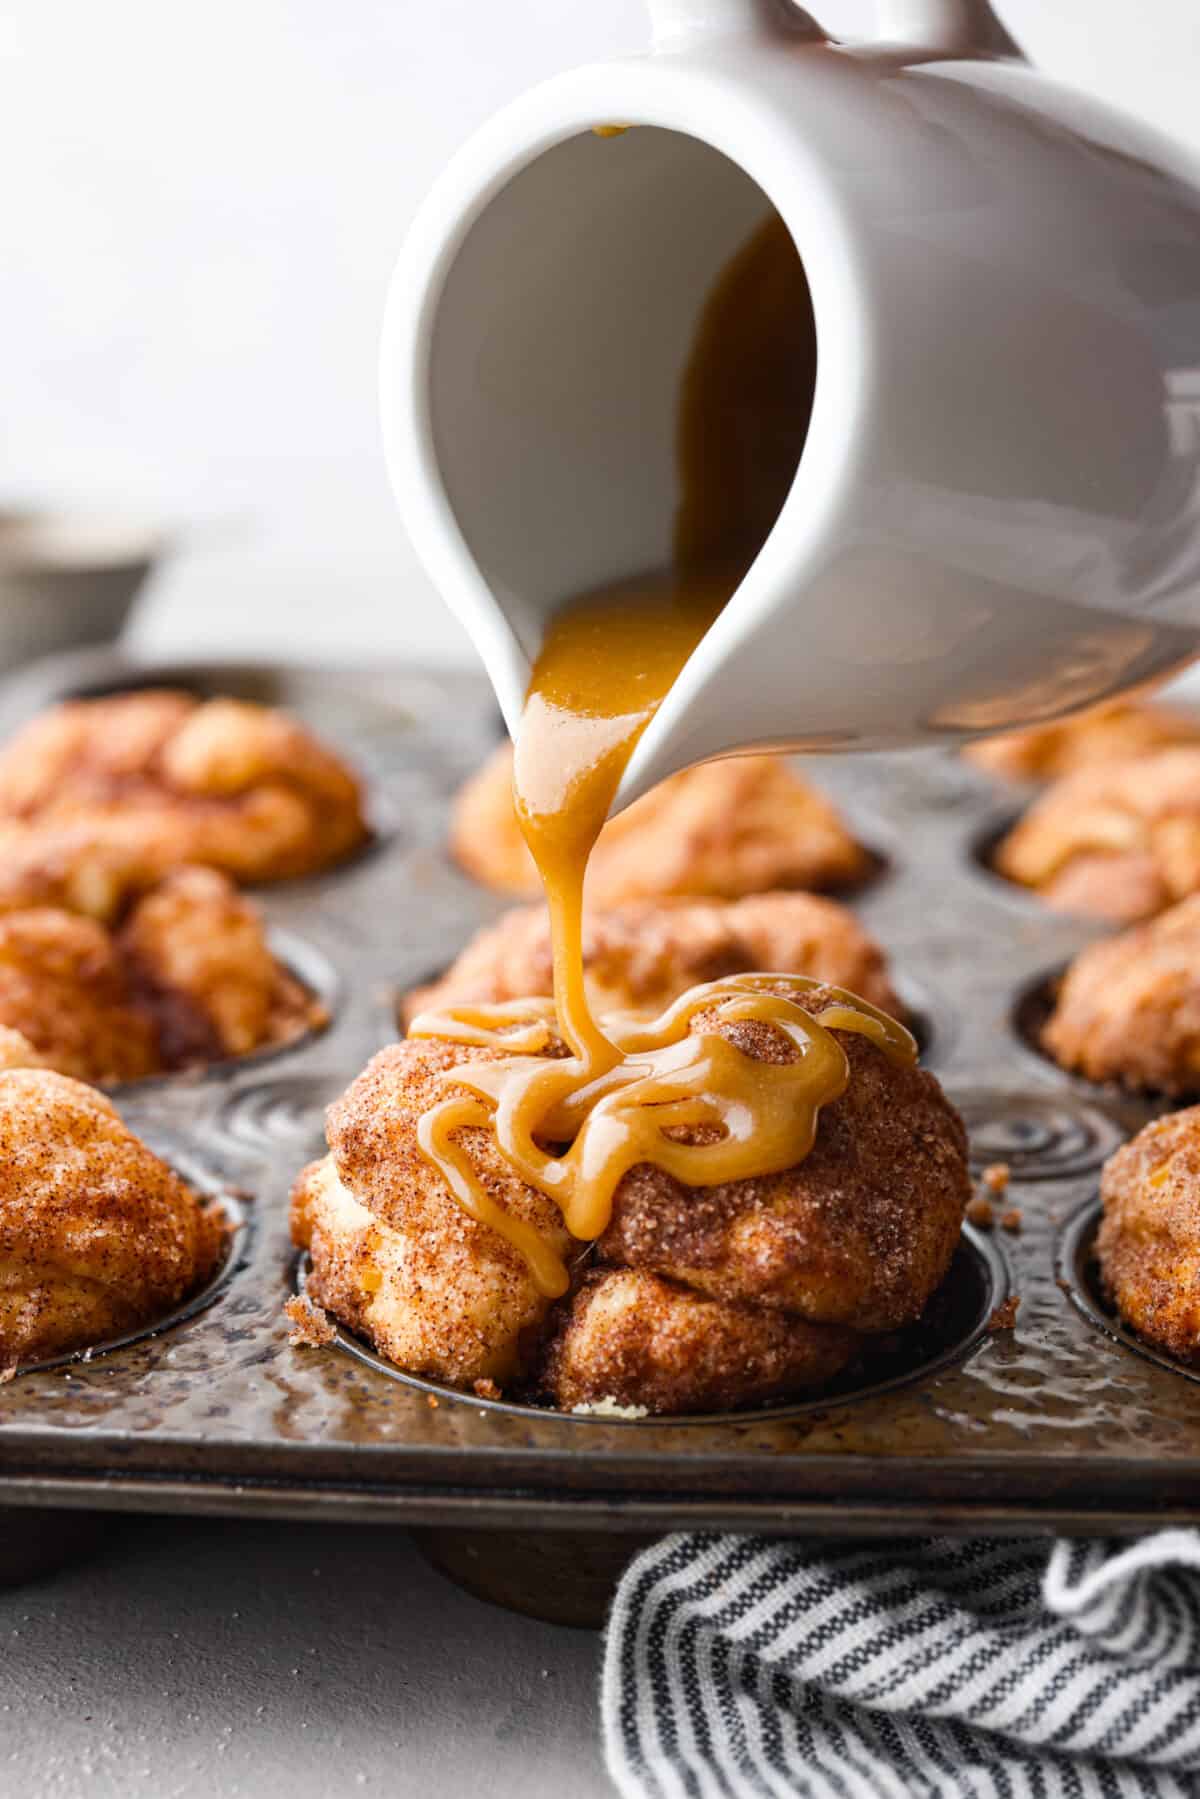 Pouring caramel sauce over a muffin.